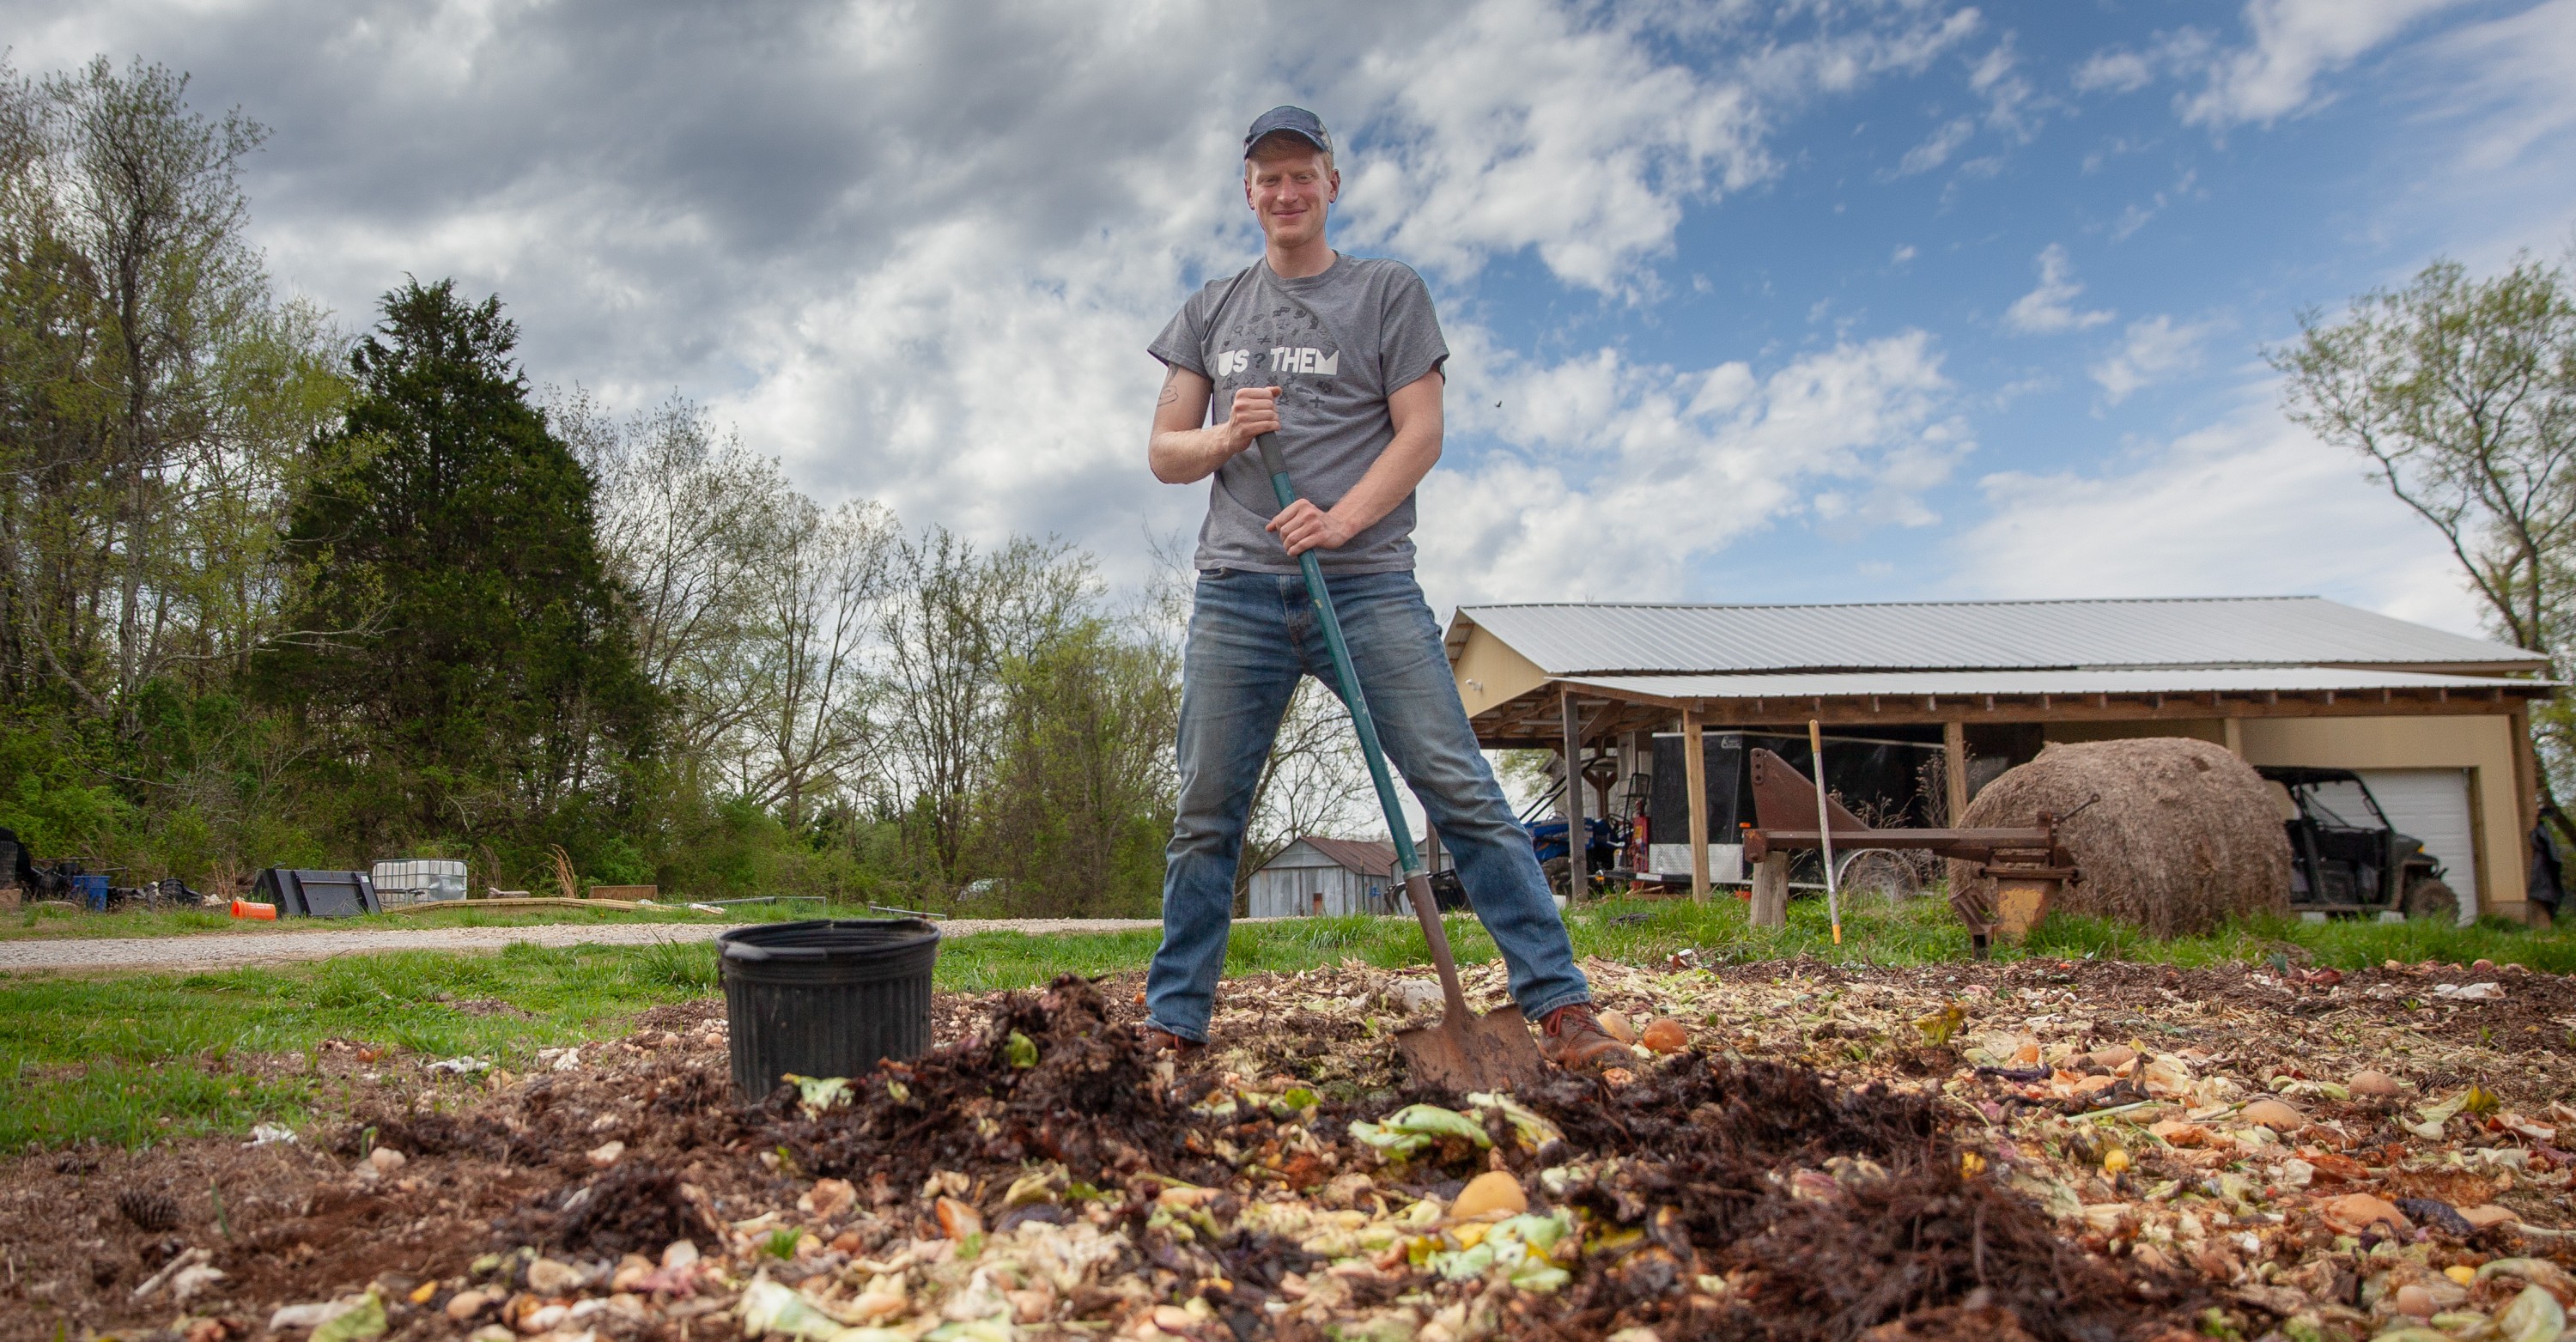  The King of Compost Mountain: Chris Hornsby atop a pile of food waste from Sewanee's McClurg Dining Hall. Photo by Buck Butler